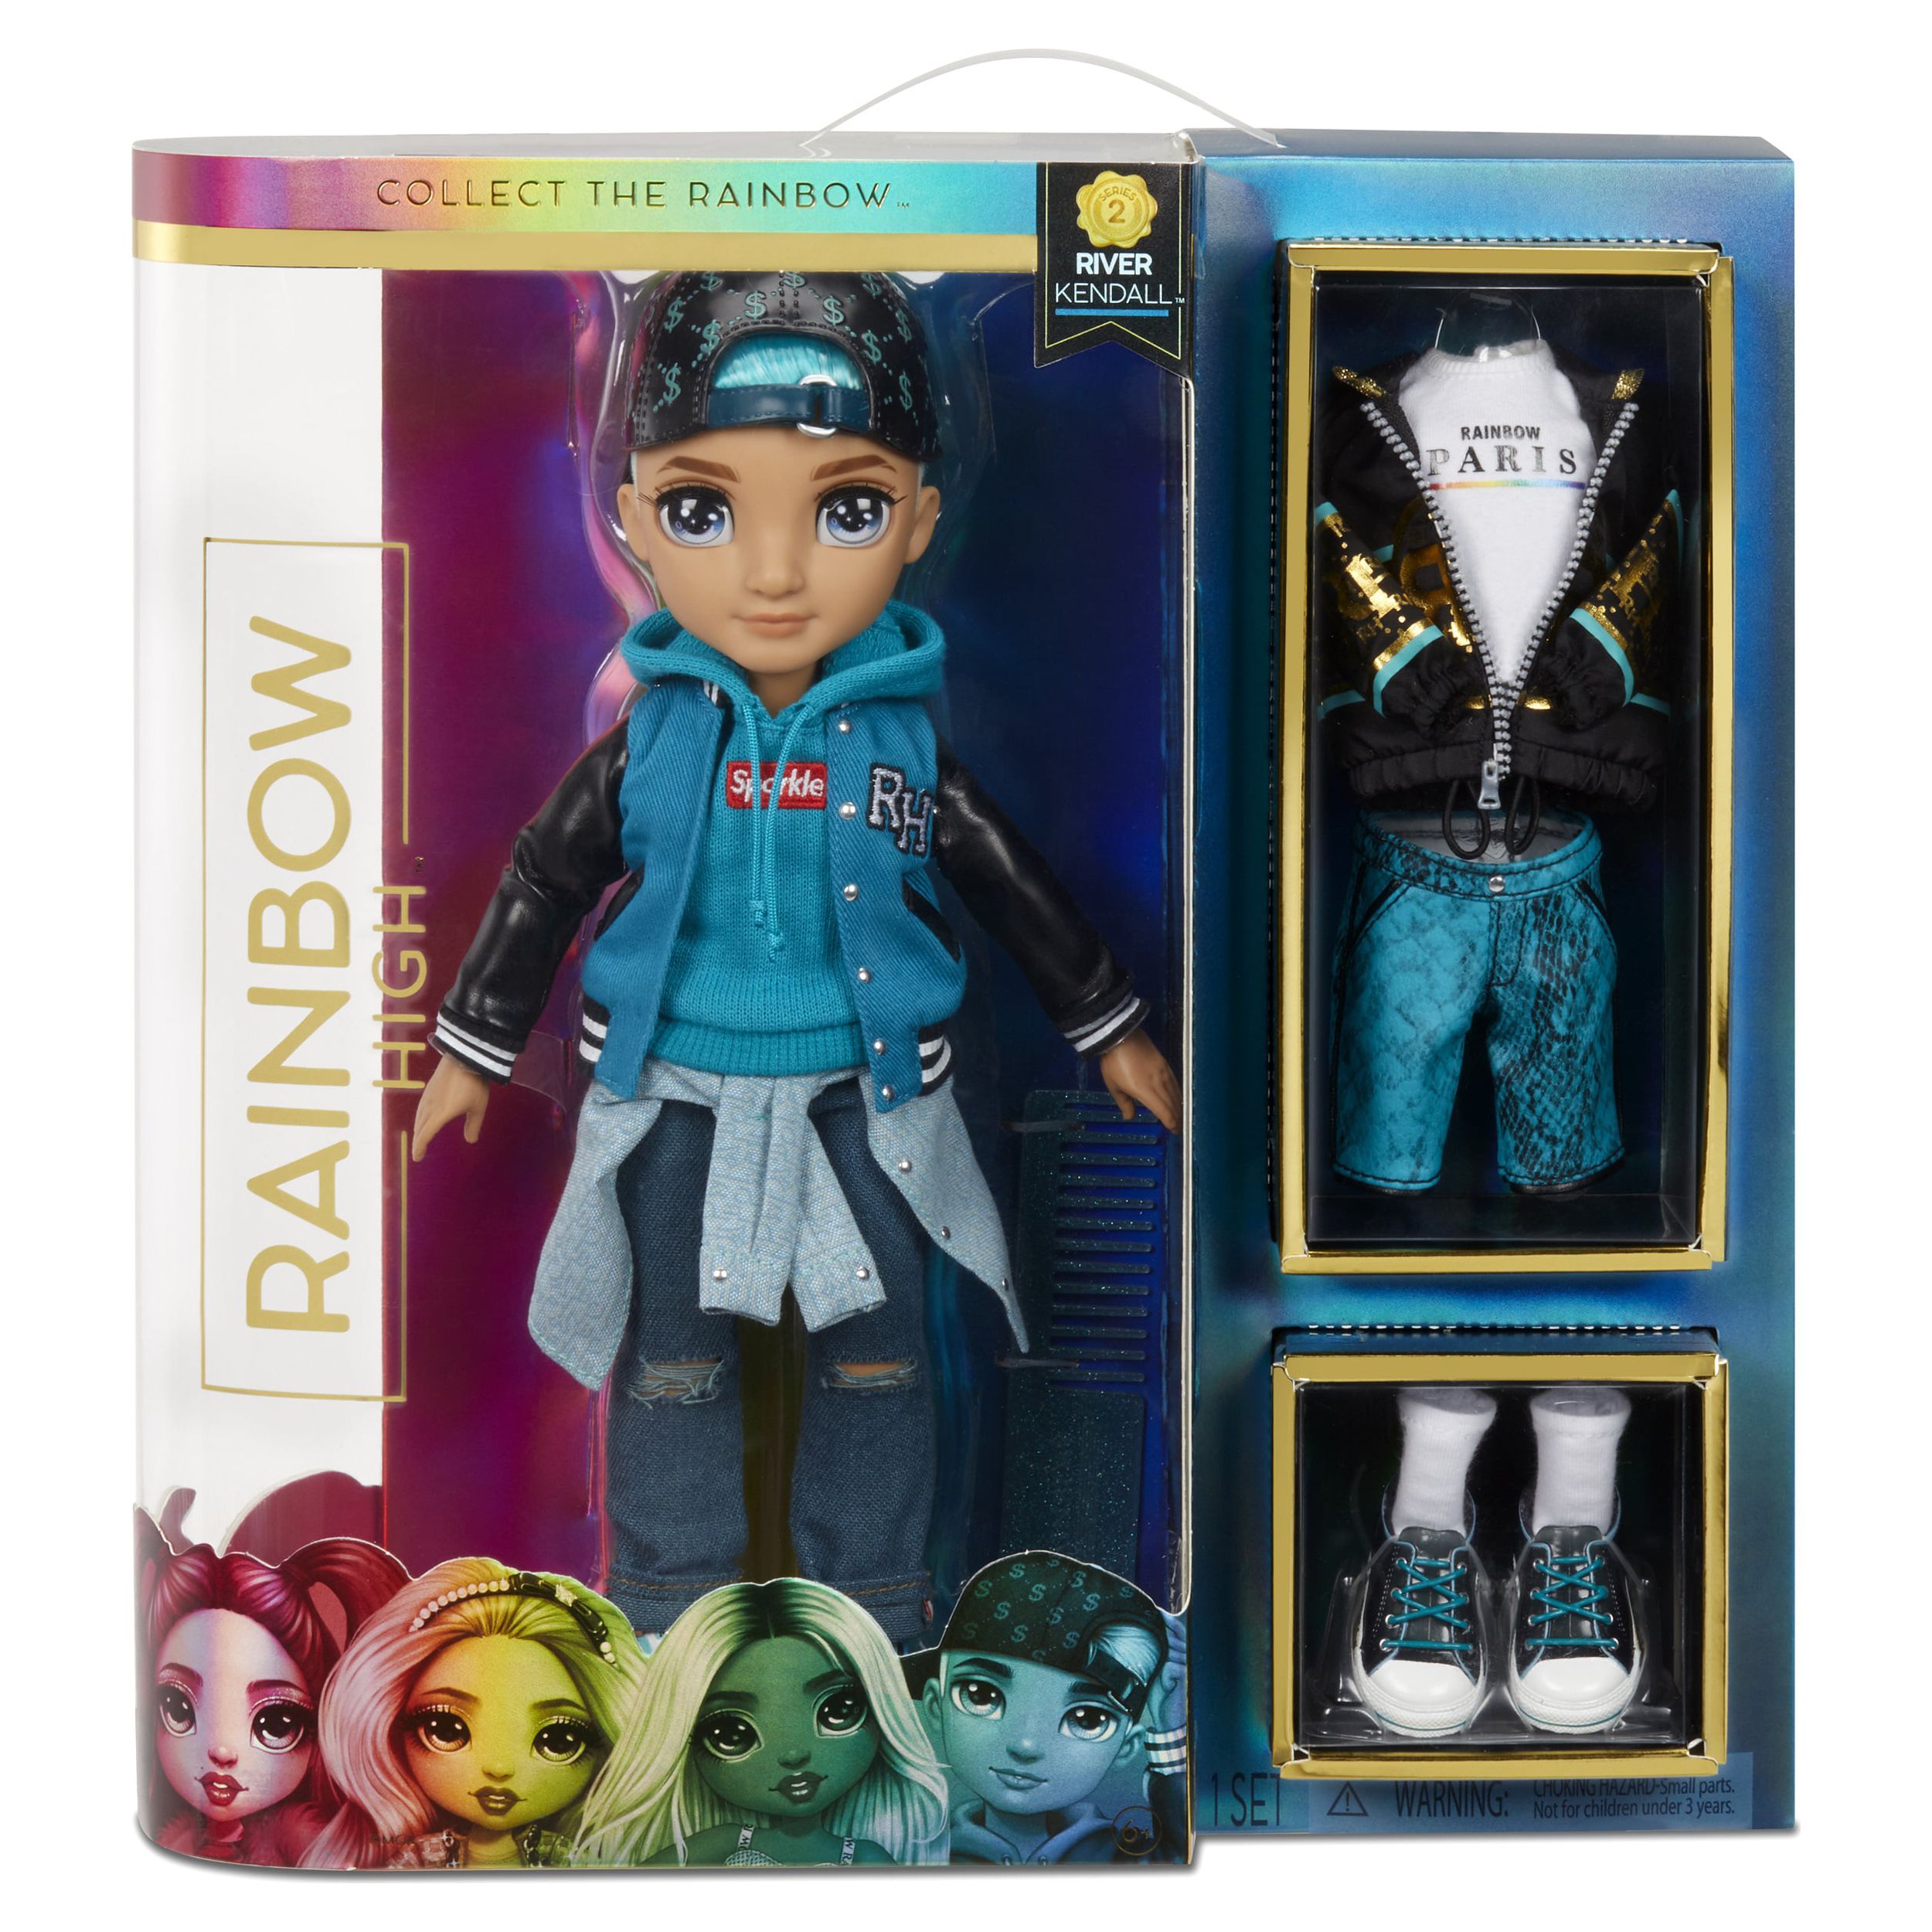 Rainbow High River Kendall – Teal Boy Fashion Doll with 2 Complete Mix & Match Outfits and Accessories, Toys for Kids 6-12 Years Old - image 3 of 7